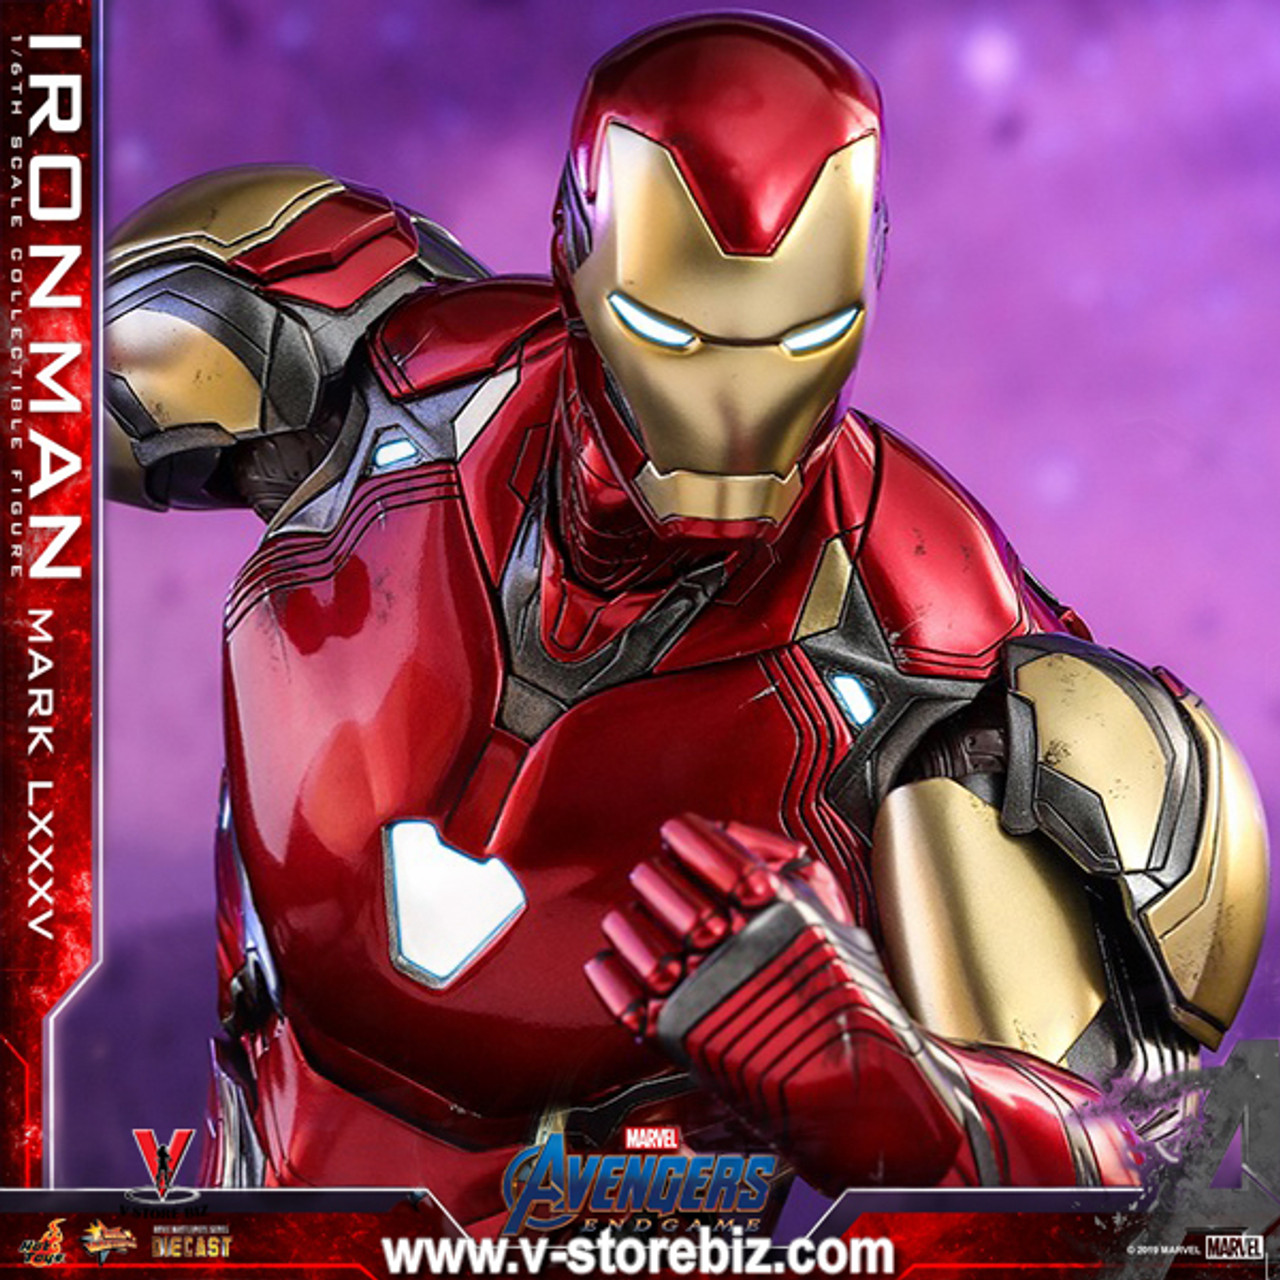 Hot Toys - 【Avengers: Endgame - 1/6th scale Iron Man Mark LXXXV Collectible  Figure】 “Part of the journey is the end.” – Tony Stark Tony Stark has faced  numerous threats since becoming